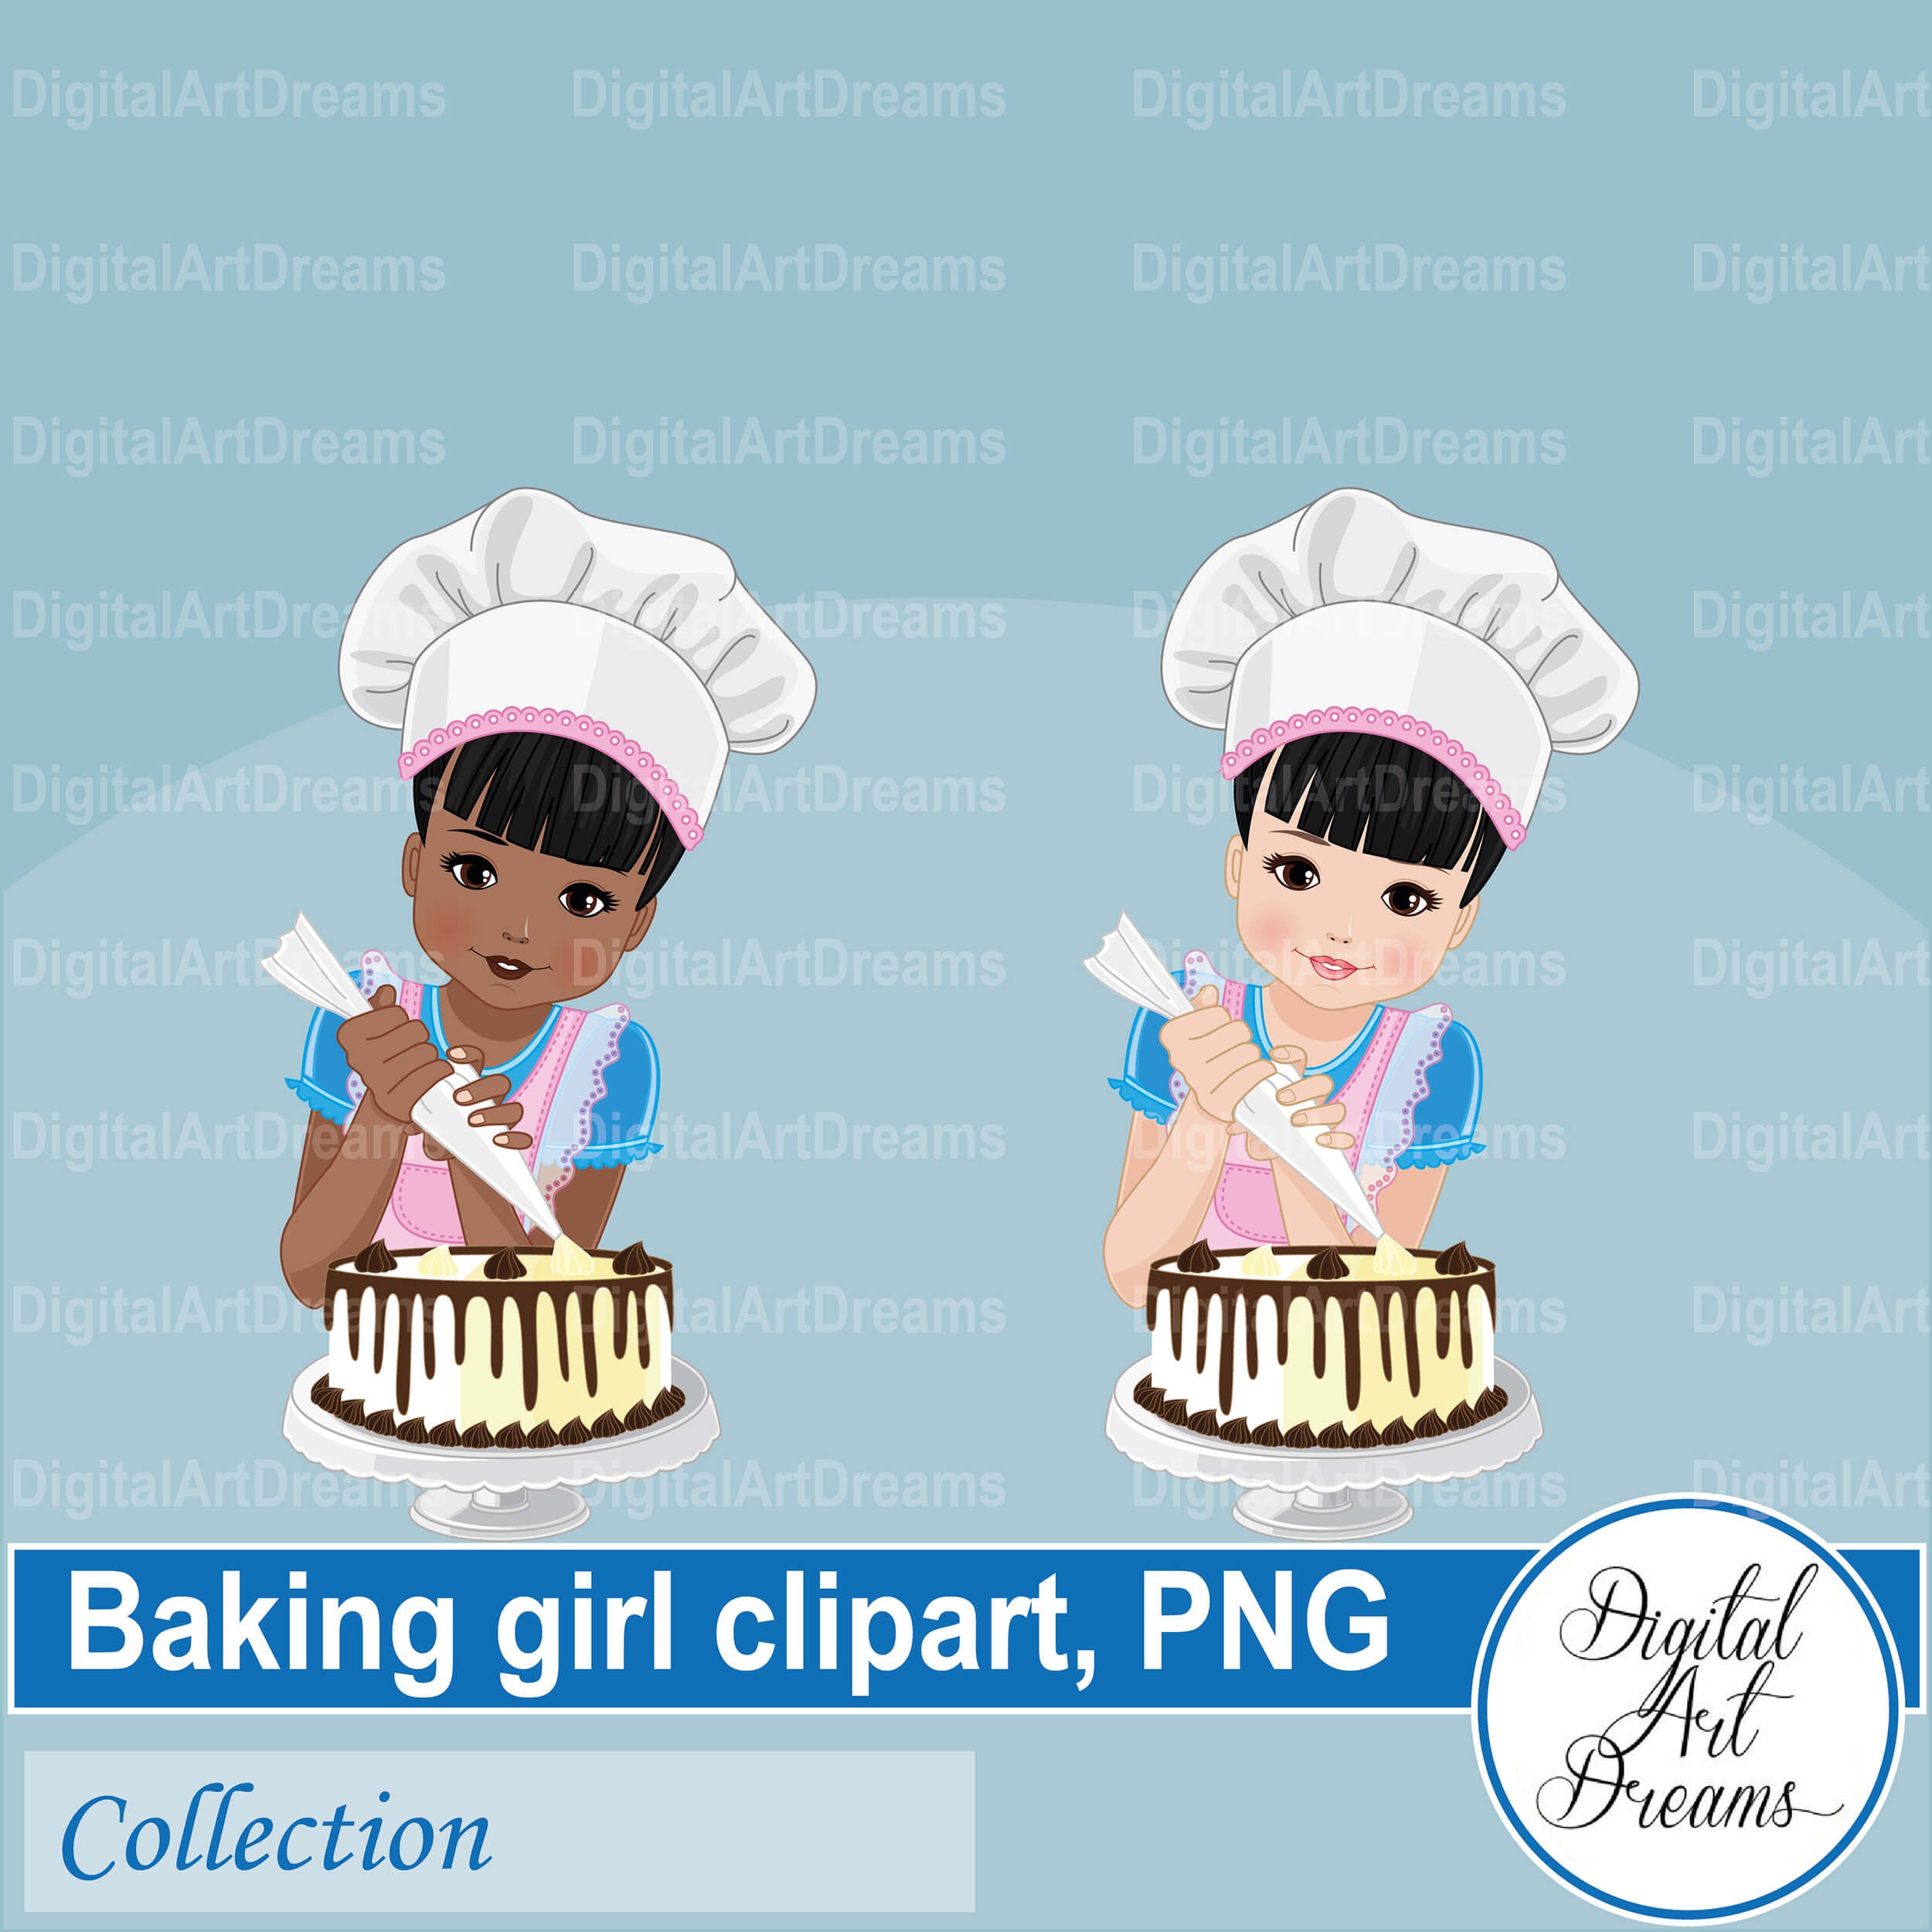 Bake A Cake Clipart Images | Free Download | PNG Transparent Background -  Pngtree